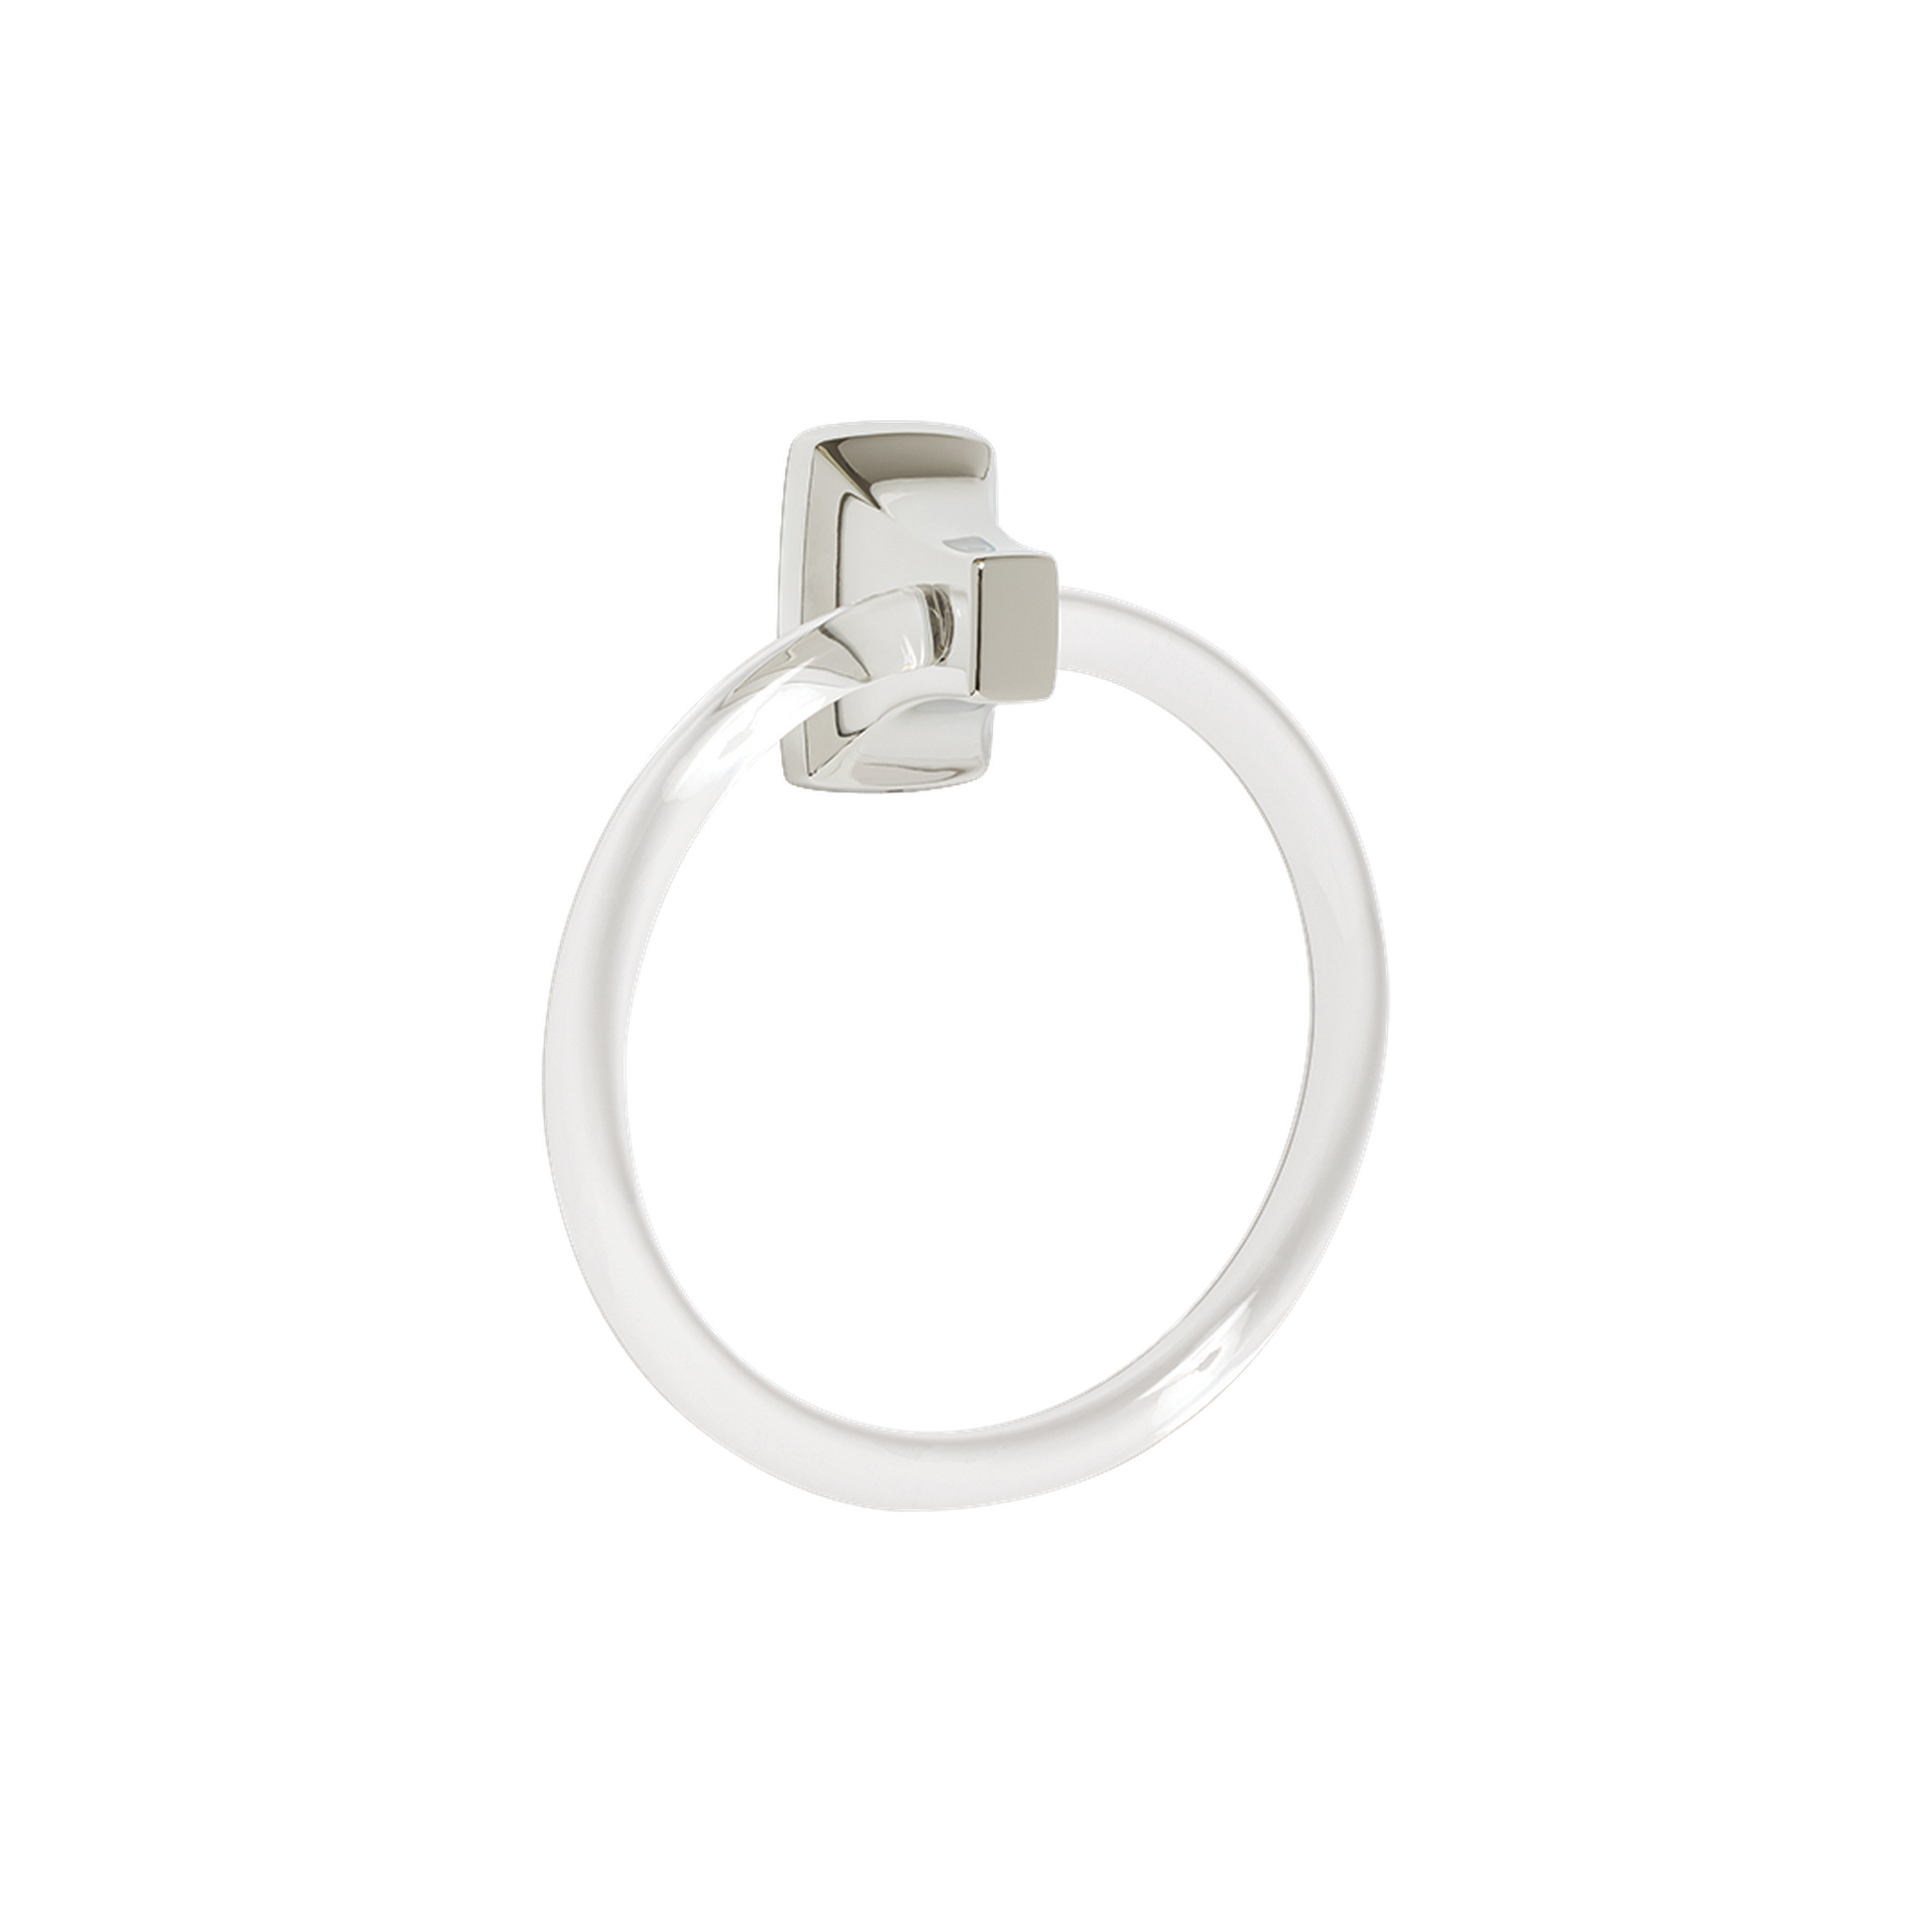 Seachrome Contemporary Series 6" Polished Zinc Alloy and Clear Acrylic Plastic Towel Ring